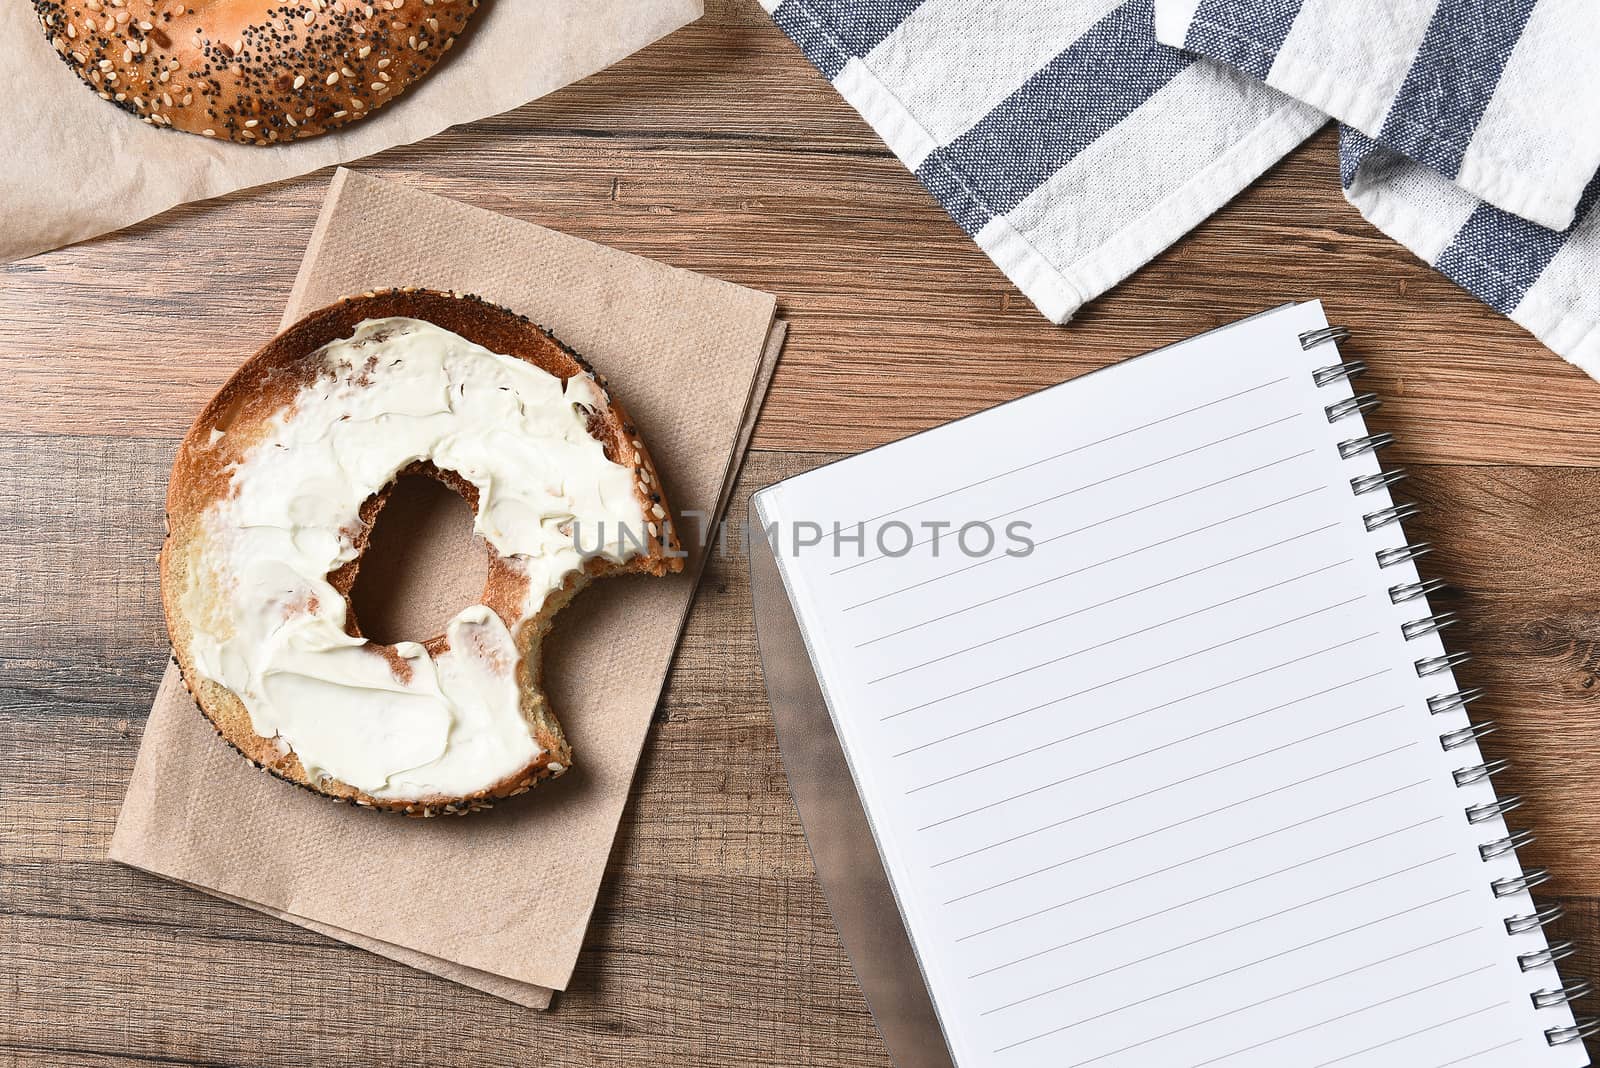 A bagel with cream cheese and a bite taken out next to a note pad. Top view in horizontal format.